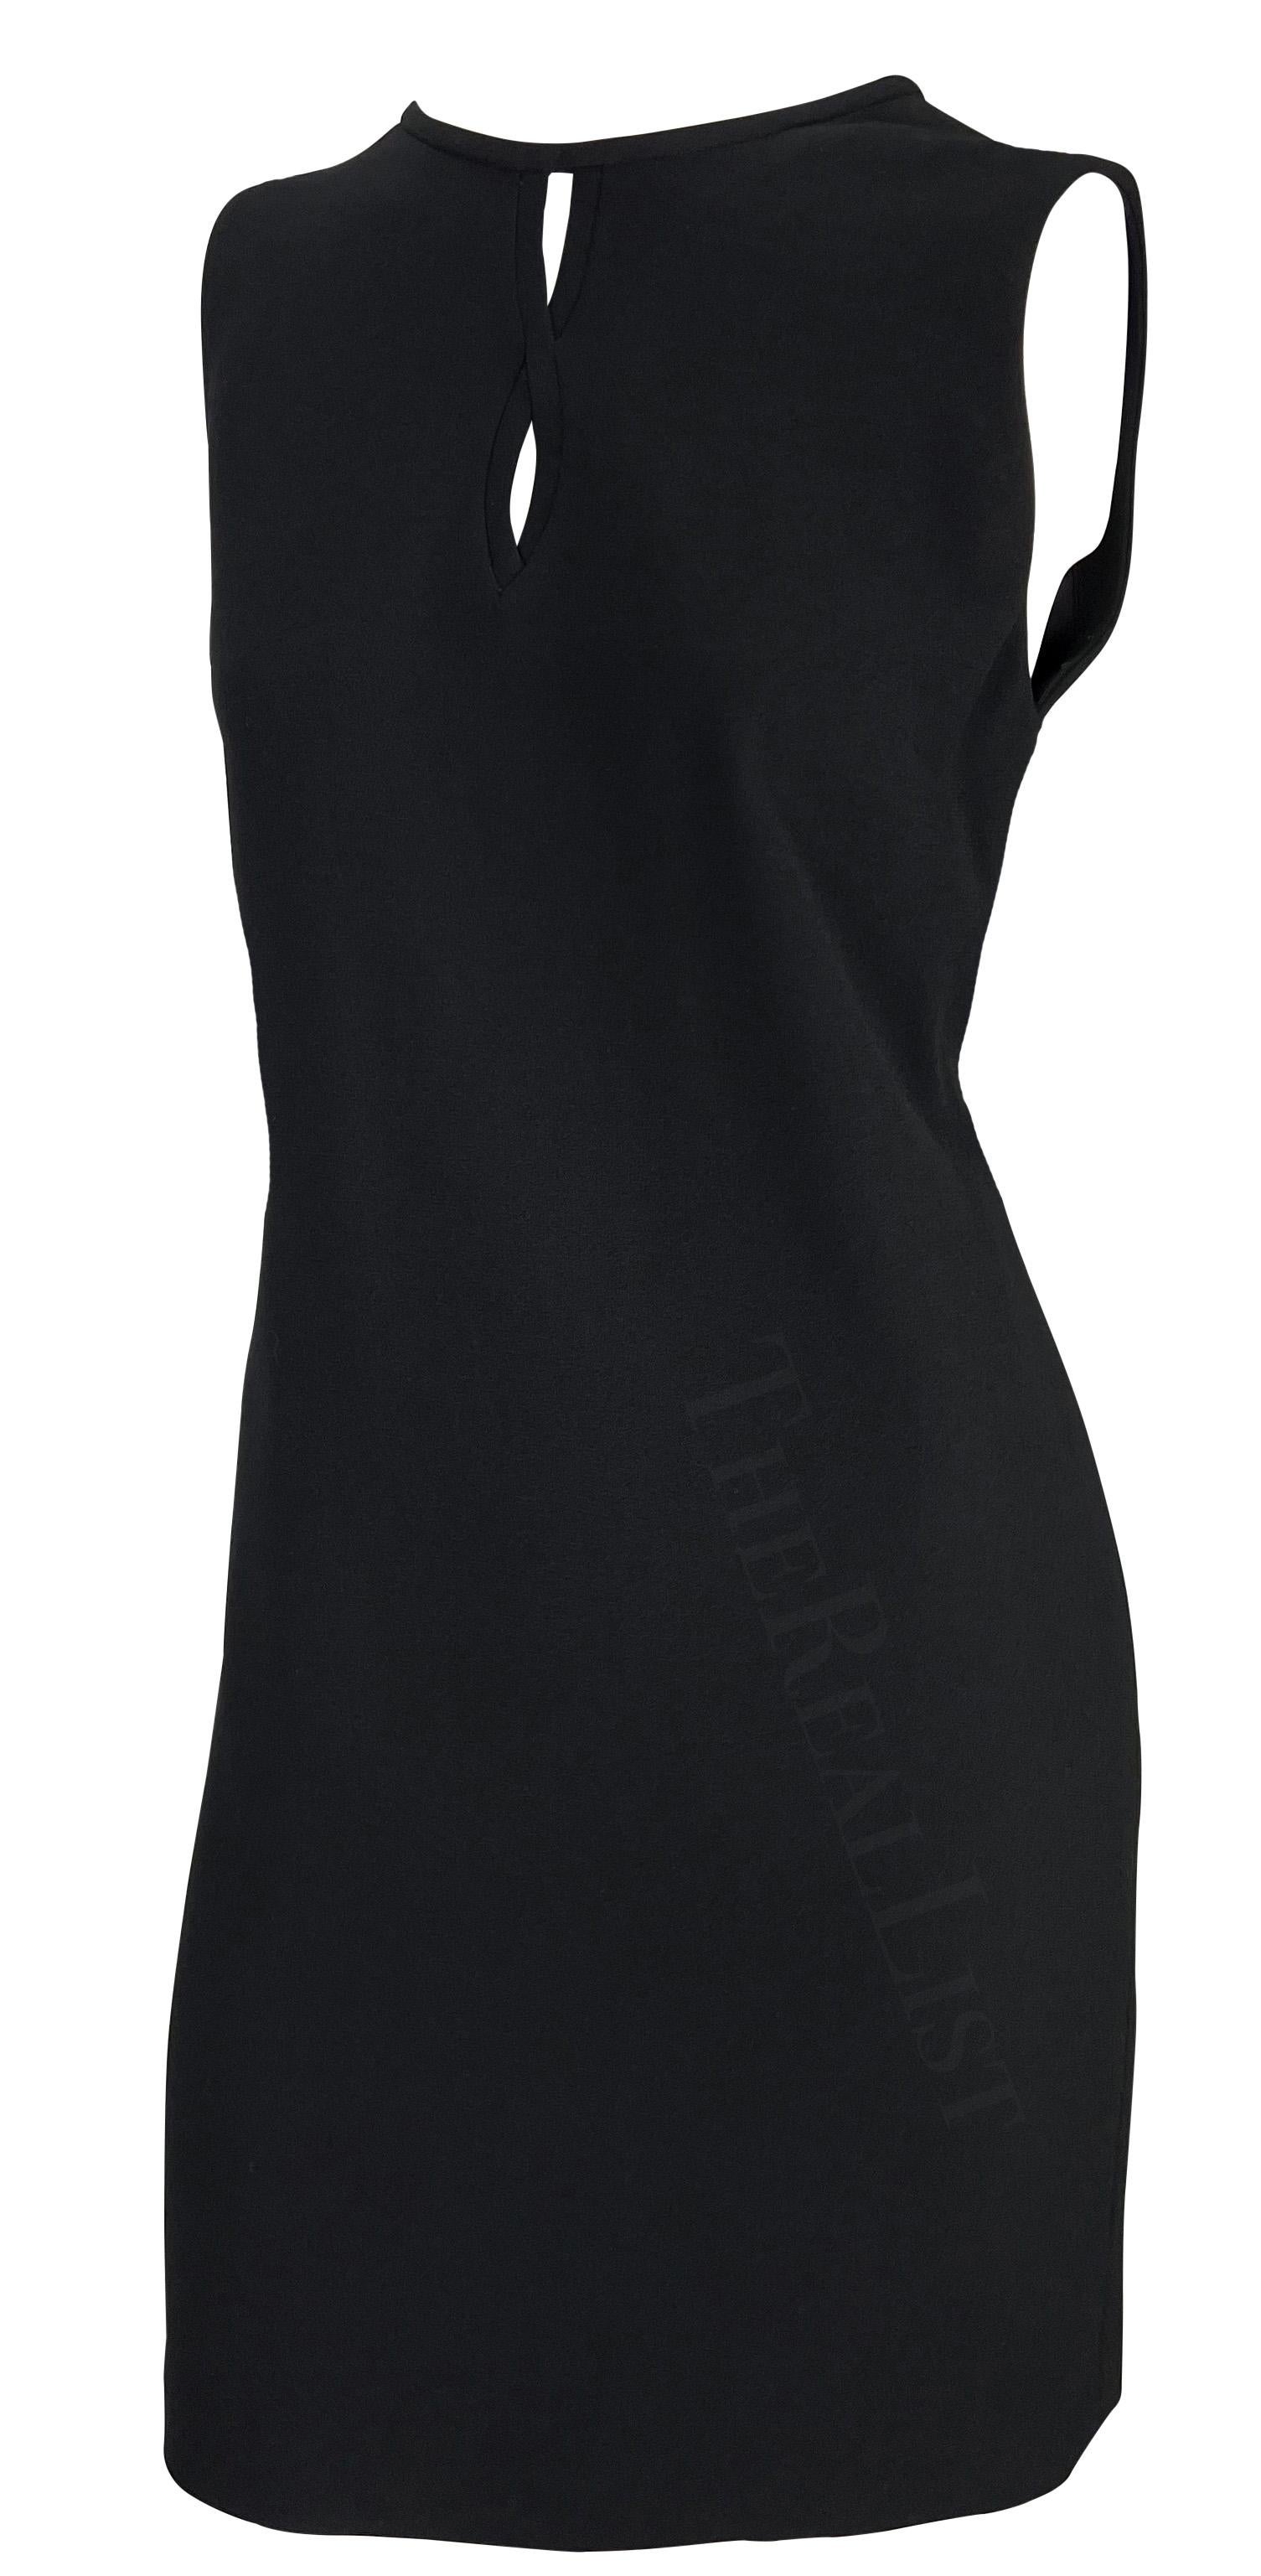 NWT F/W 1997 Gianni Versace Couture Cutout Black Wool Shift Dress In Excellent Condition For Sale In West Hollywood, CA